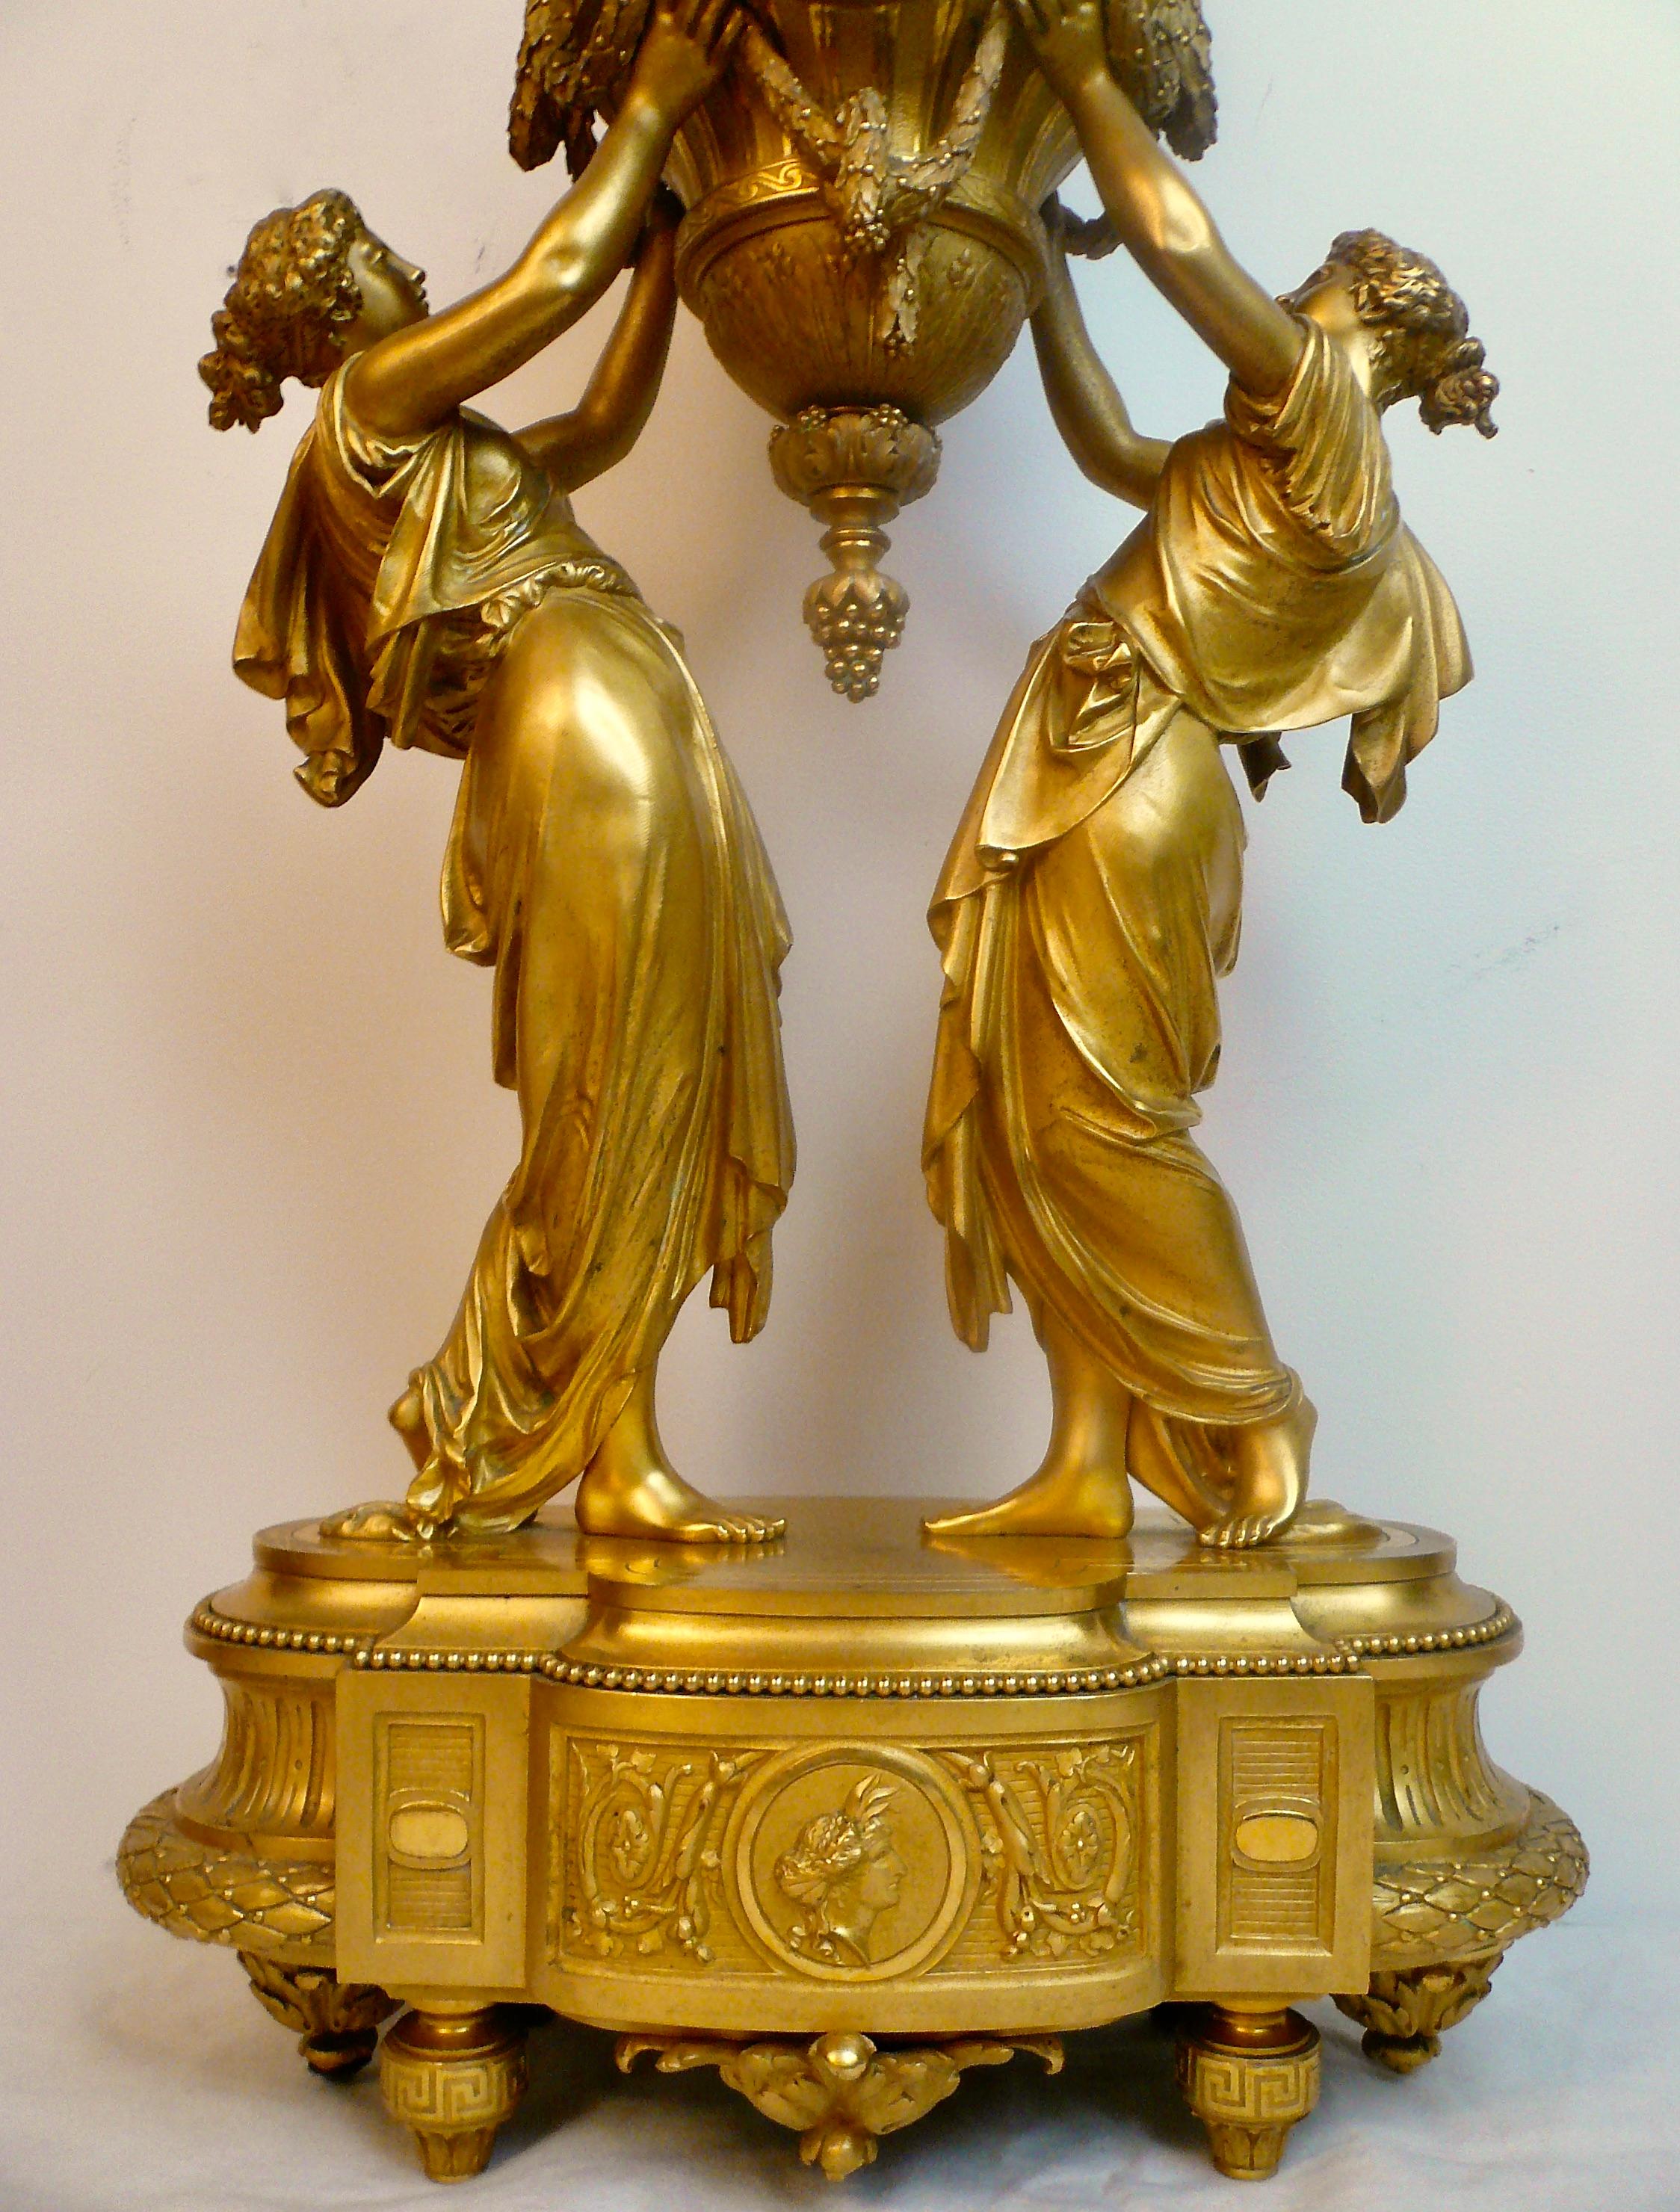 Louis XVI Neo-Classical Style Figural Ormolu Clock by Charpentier & Cie For Sale 7